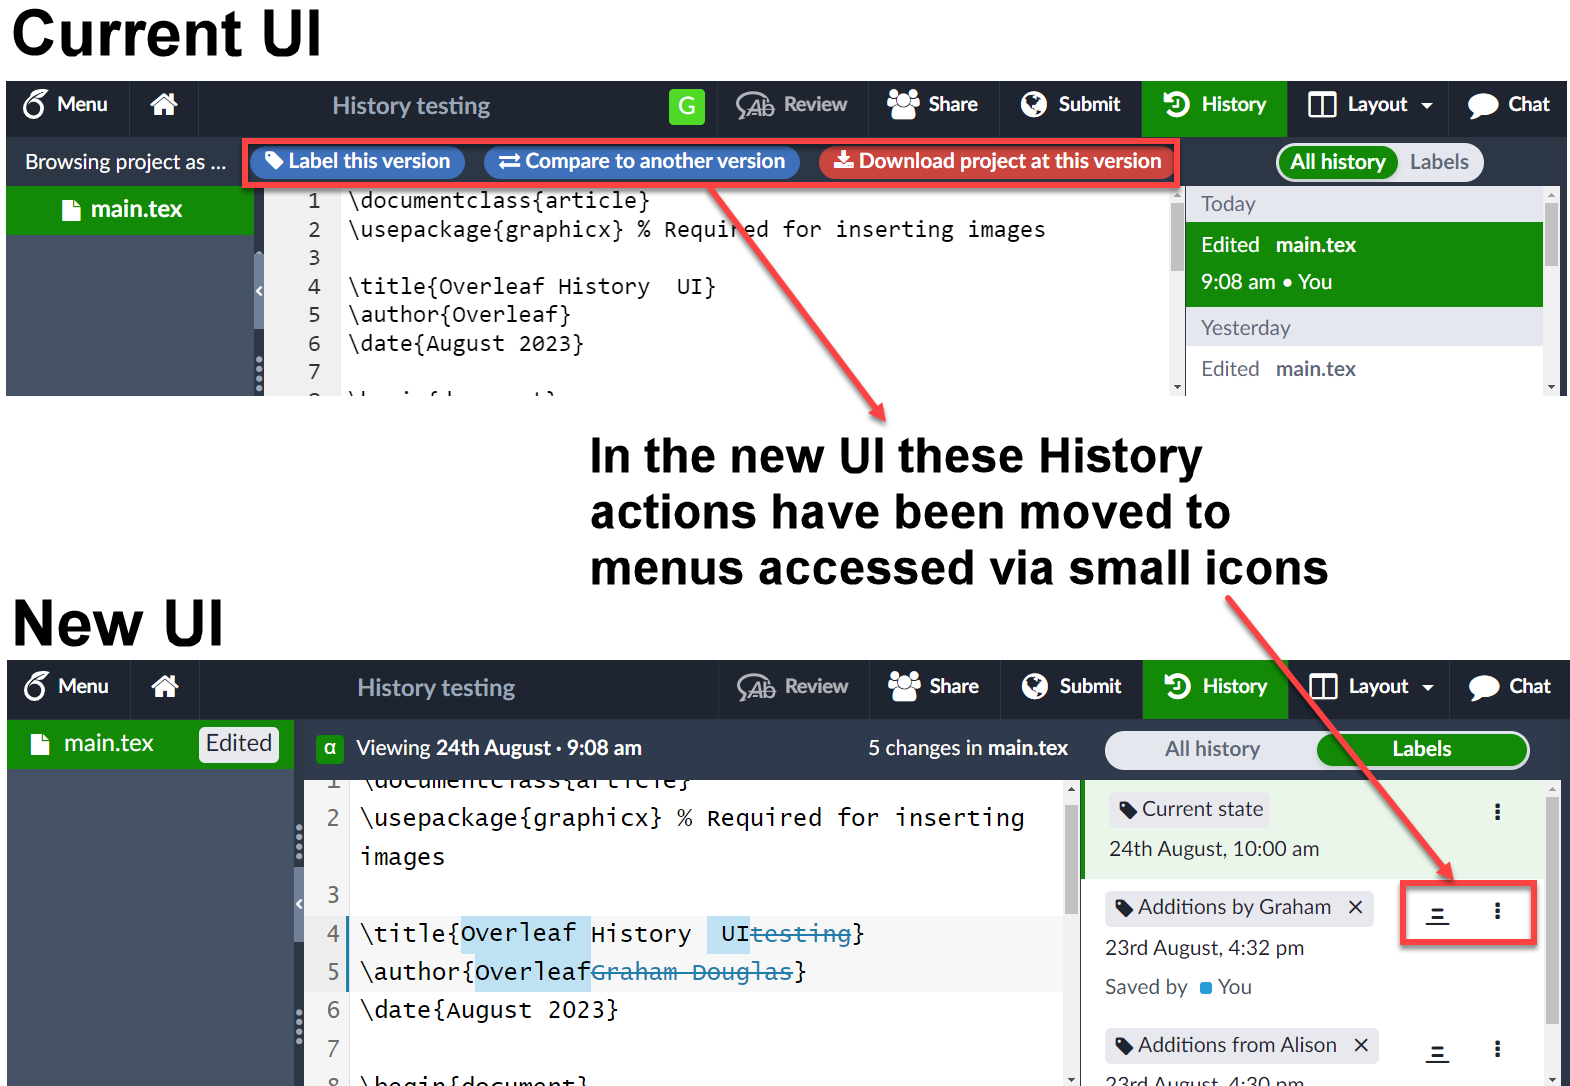 An image comparing the old and new user interfaces for the Overleaf History feature